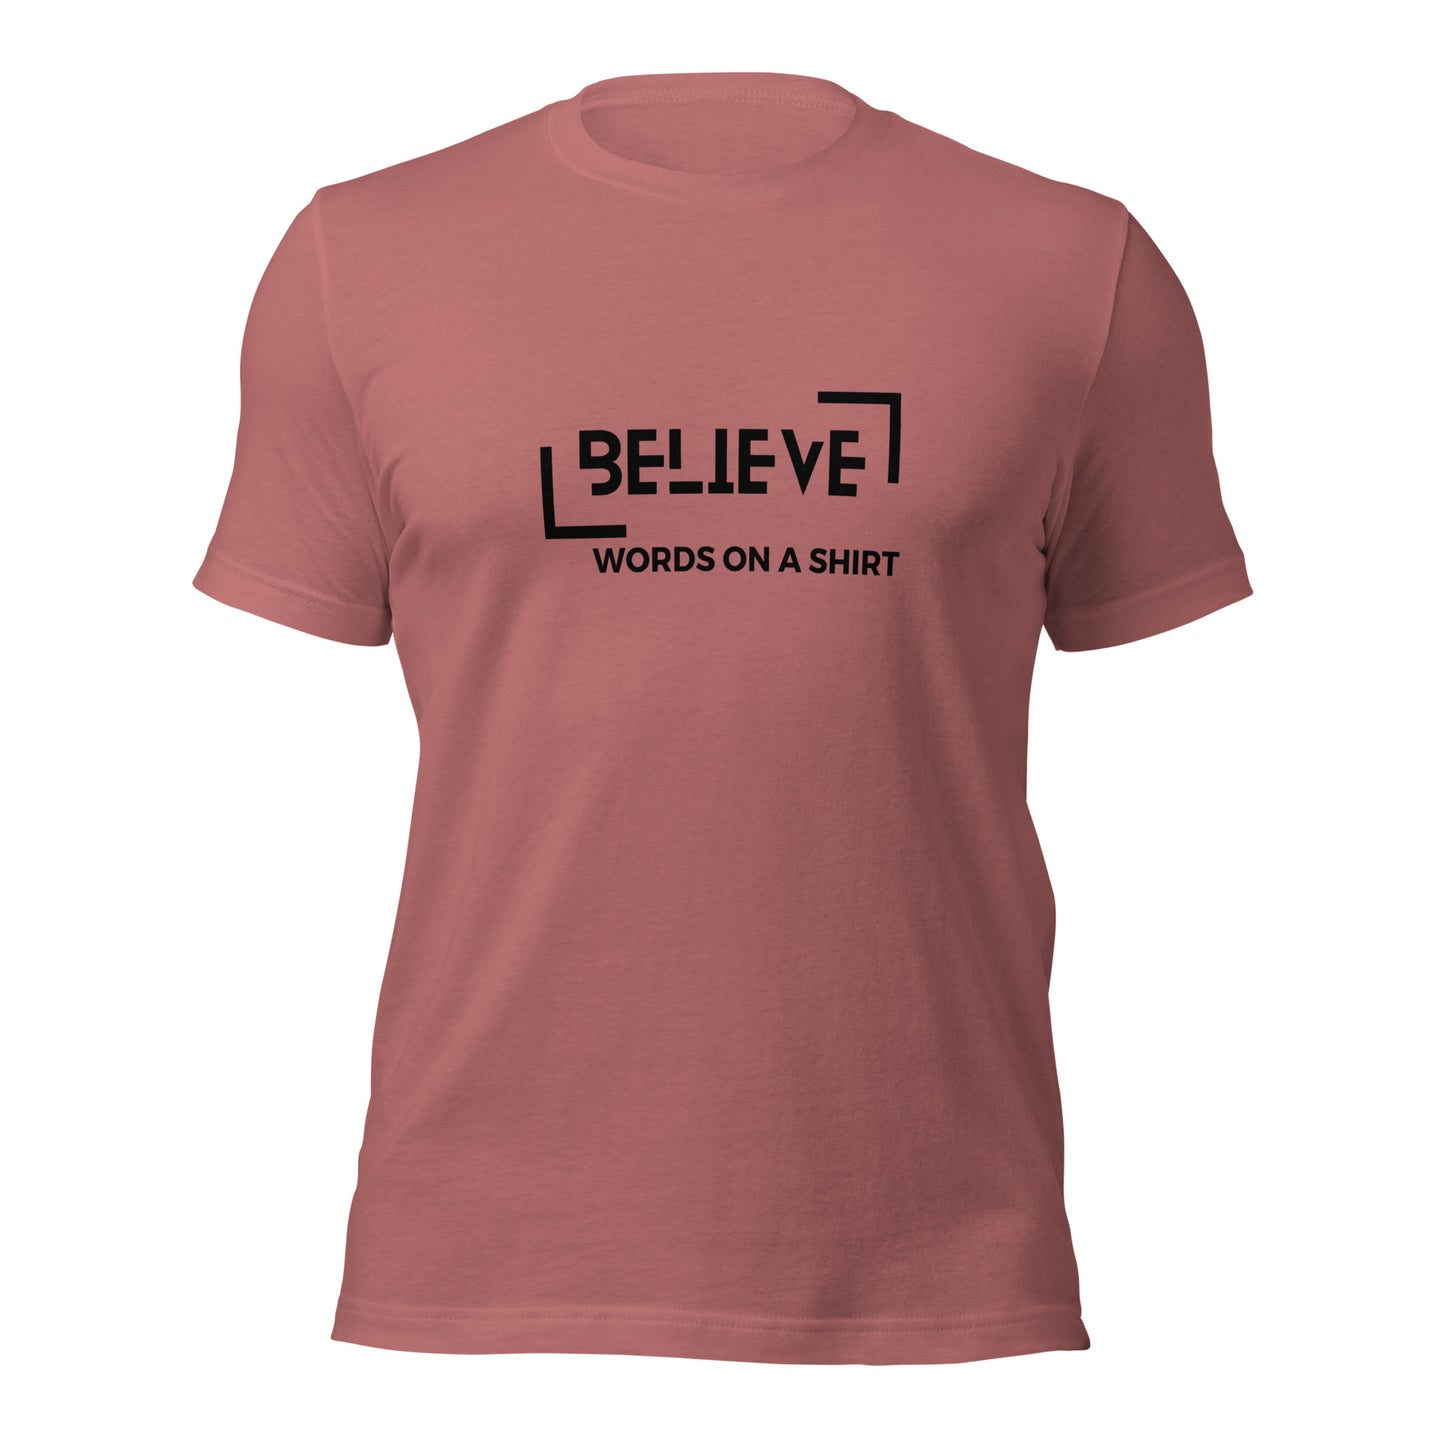 T-shirts are a dime a dozen, but this one stands out from the pack. It’s super soft, breathable, and has just the right amount of stretch. Need we say more? Believe!